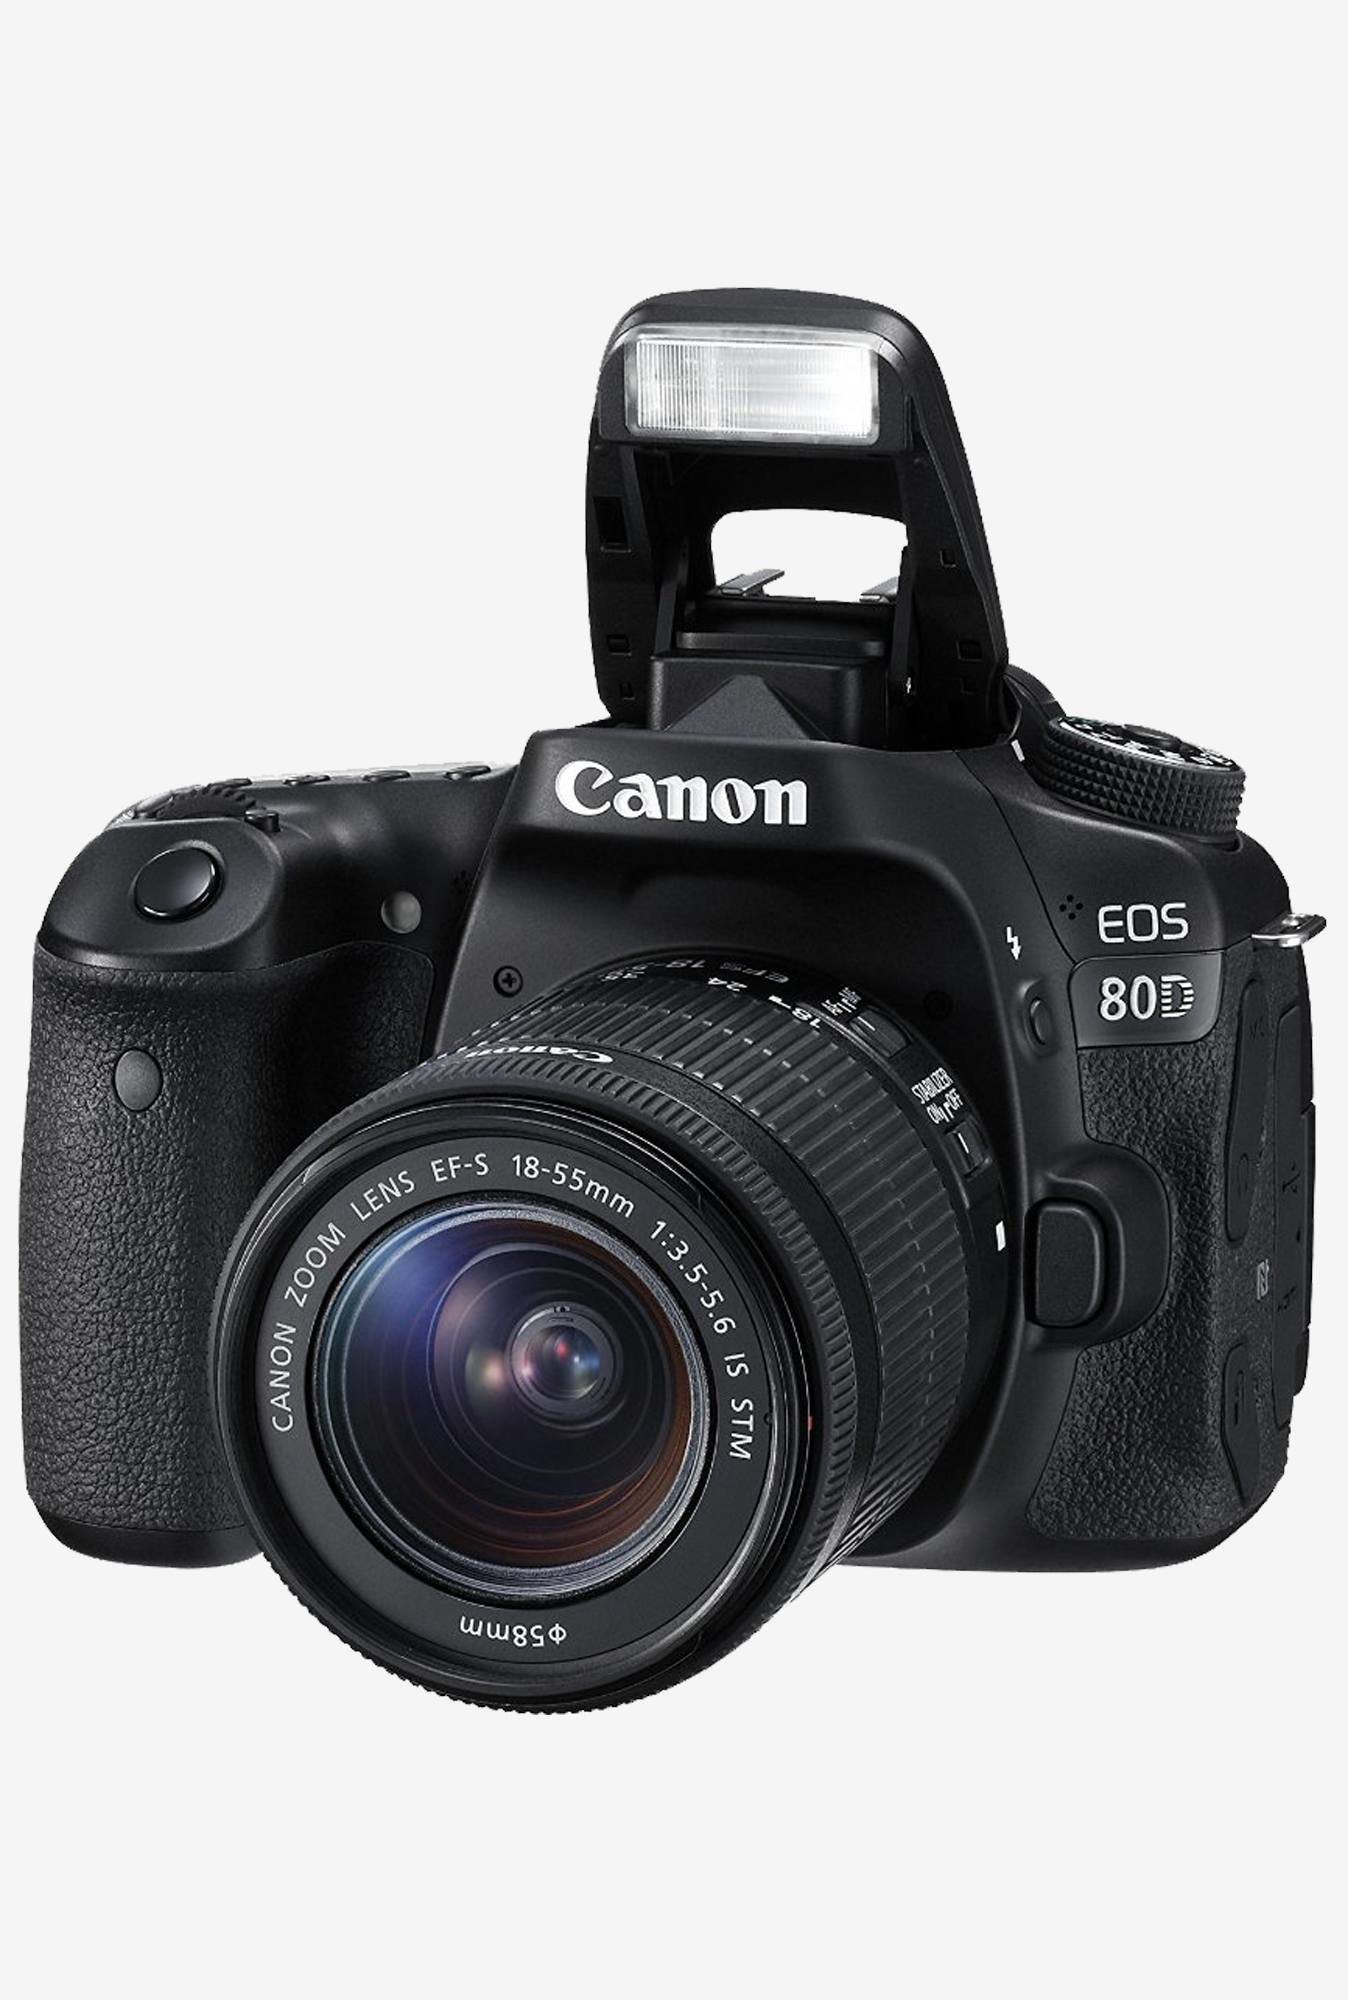 Tatacliq Offers – Canon EOS 80D DSLR Camera with EF-S18-55 IS STM Lens Black @ Rs. 73710